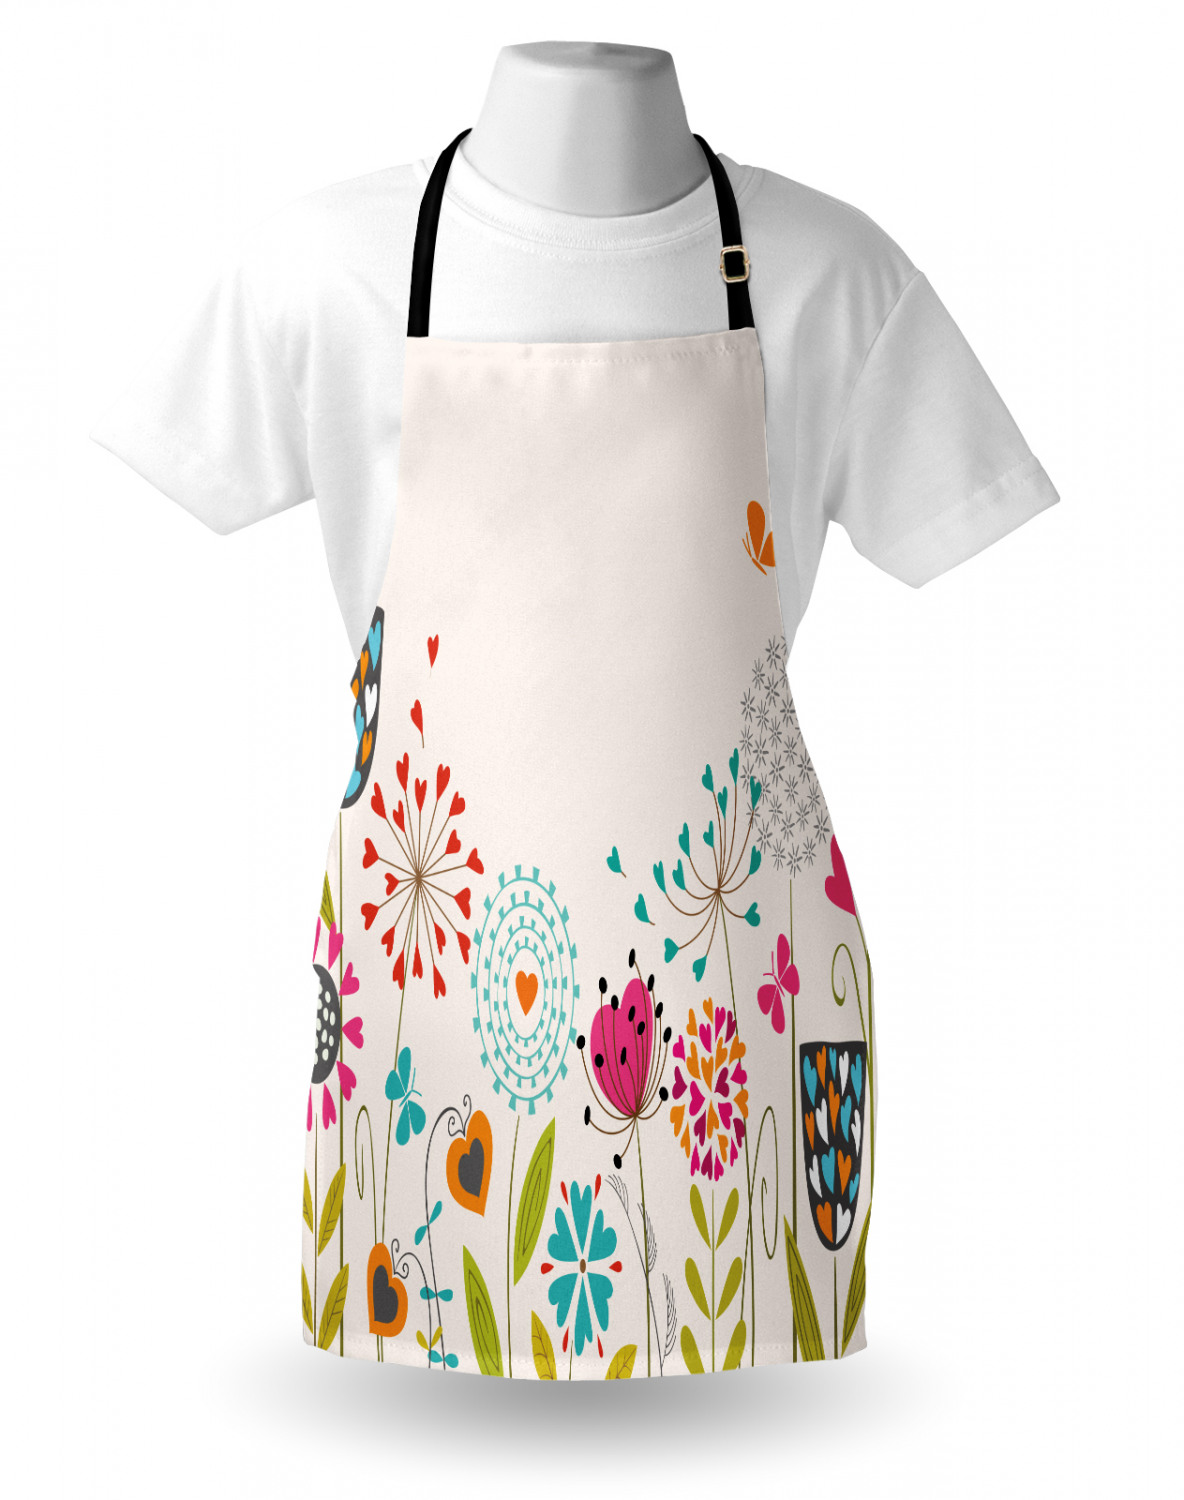 Details about   Ambesonne Flowers Apron Unisex Kitchen Bib with Adjustable Neck Cooking Baking 